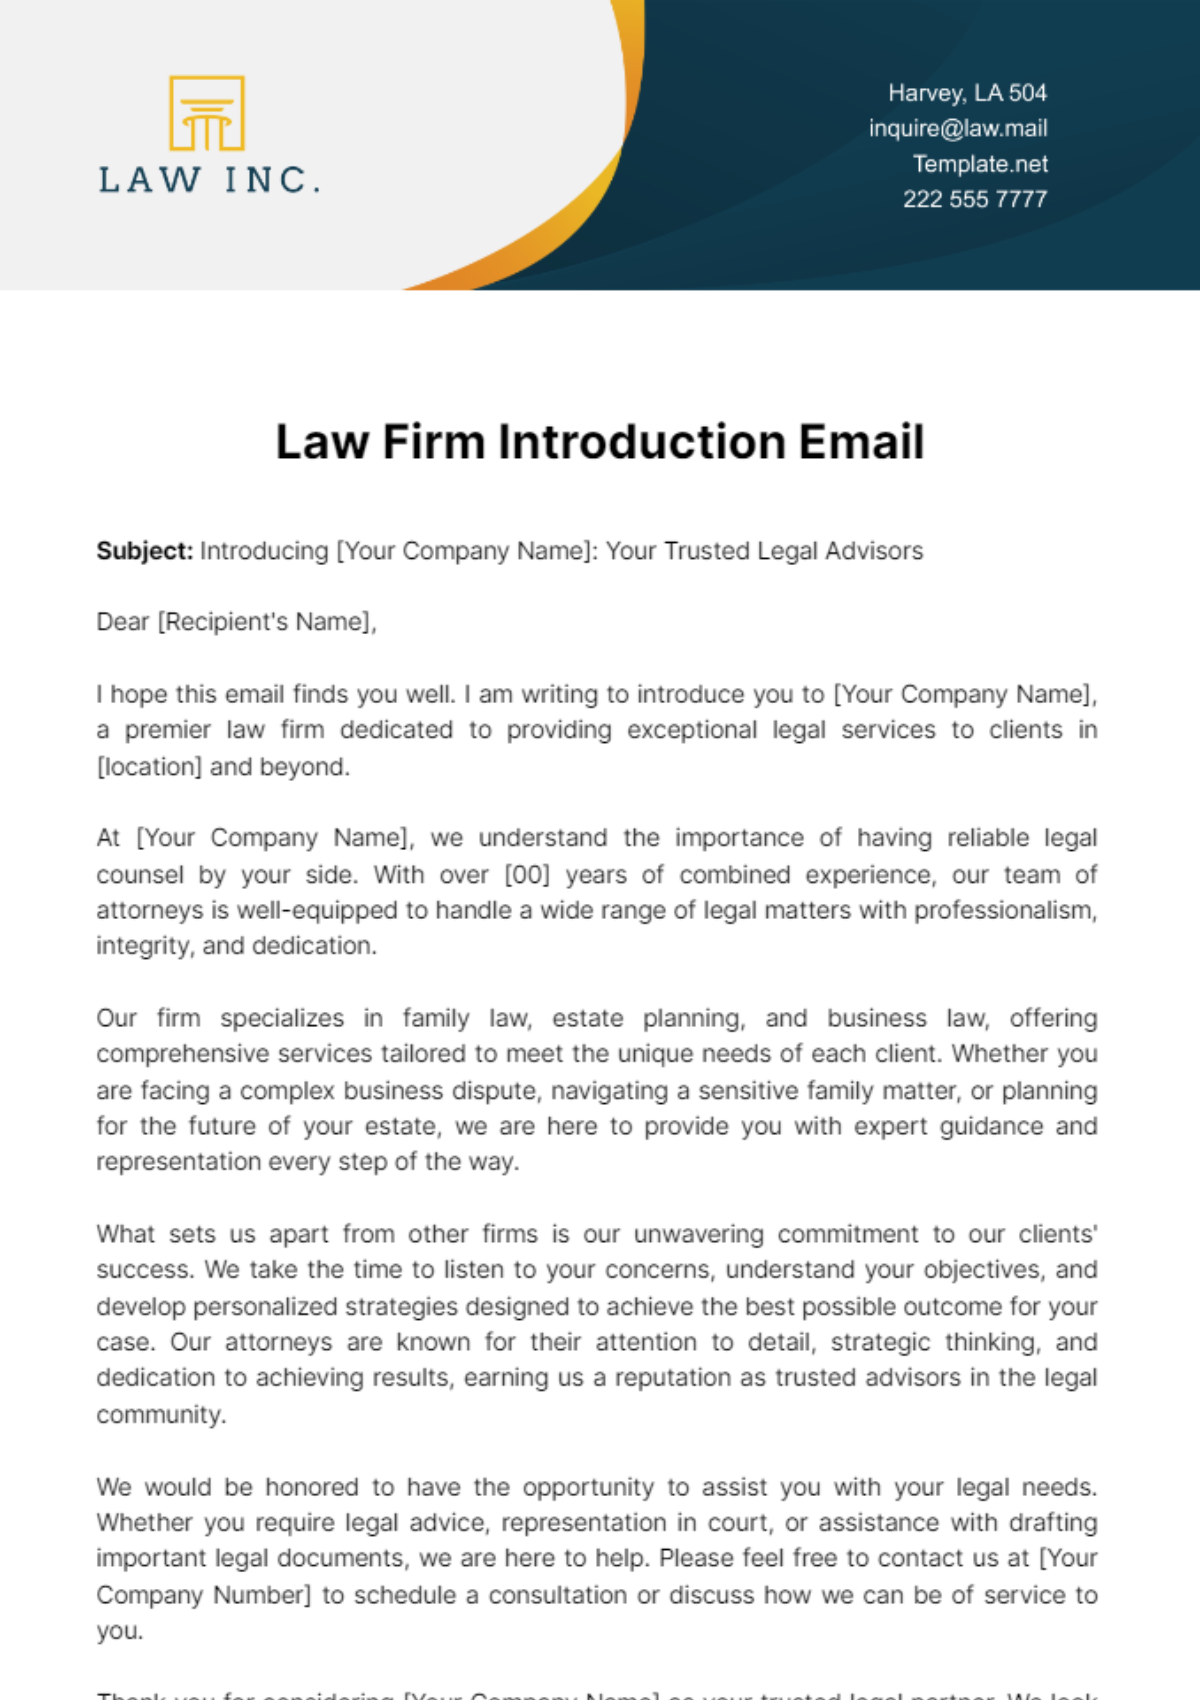 Free Law Firm Introduction Email Template